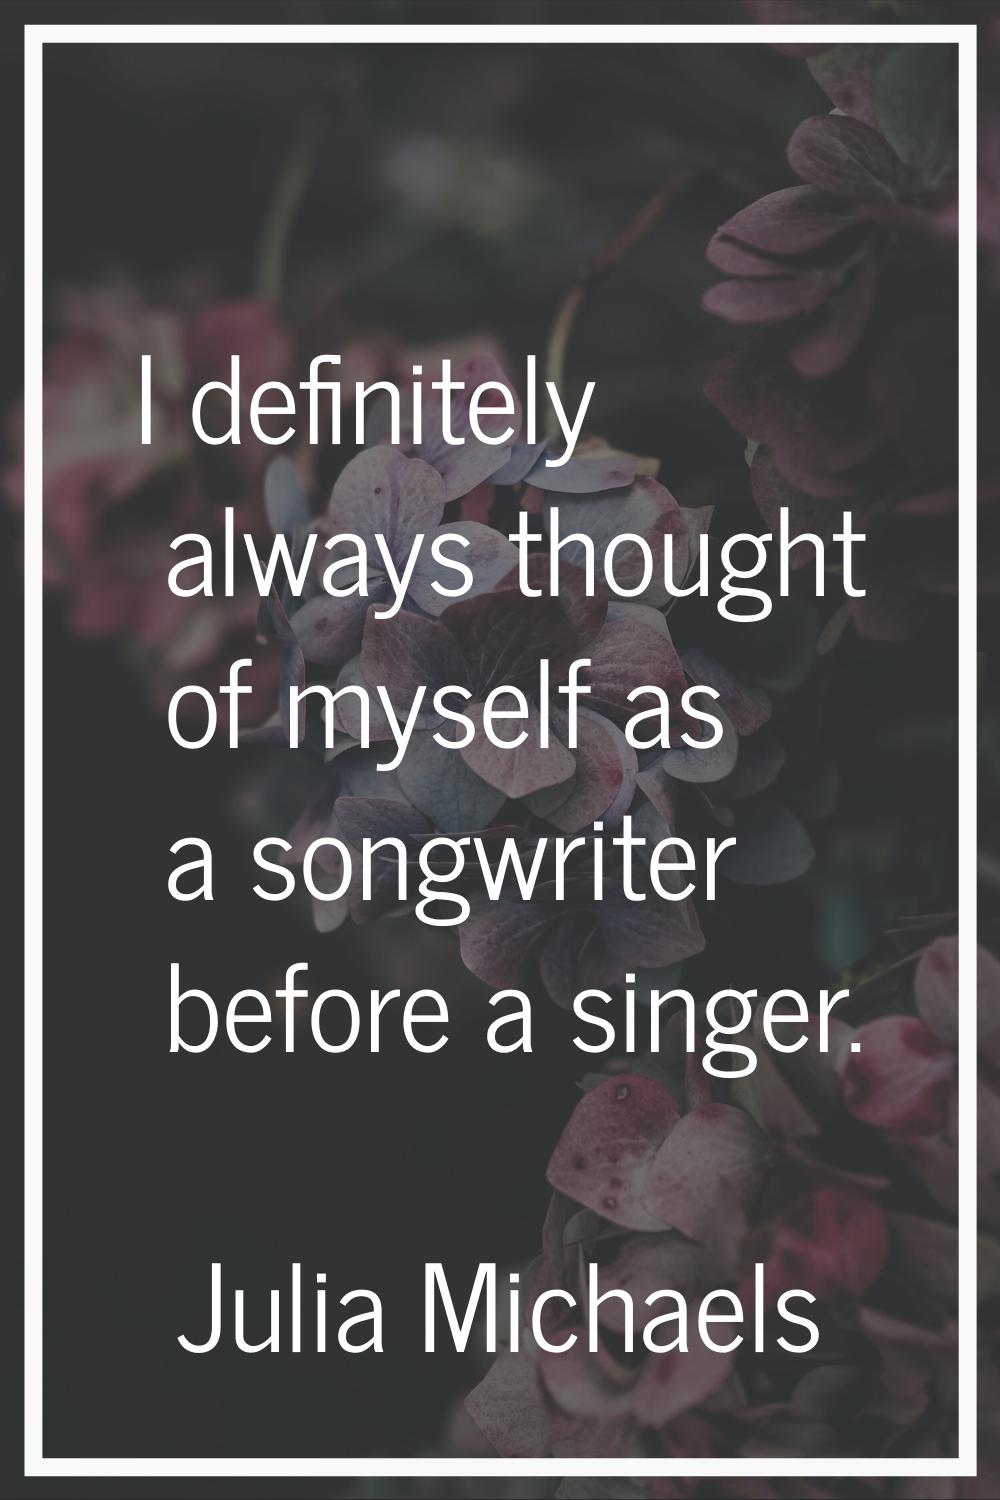 I definitely always thought of myself as a songwriter before a singer.